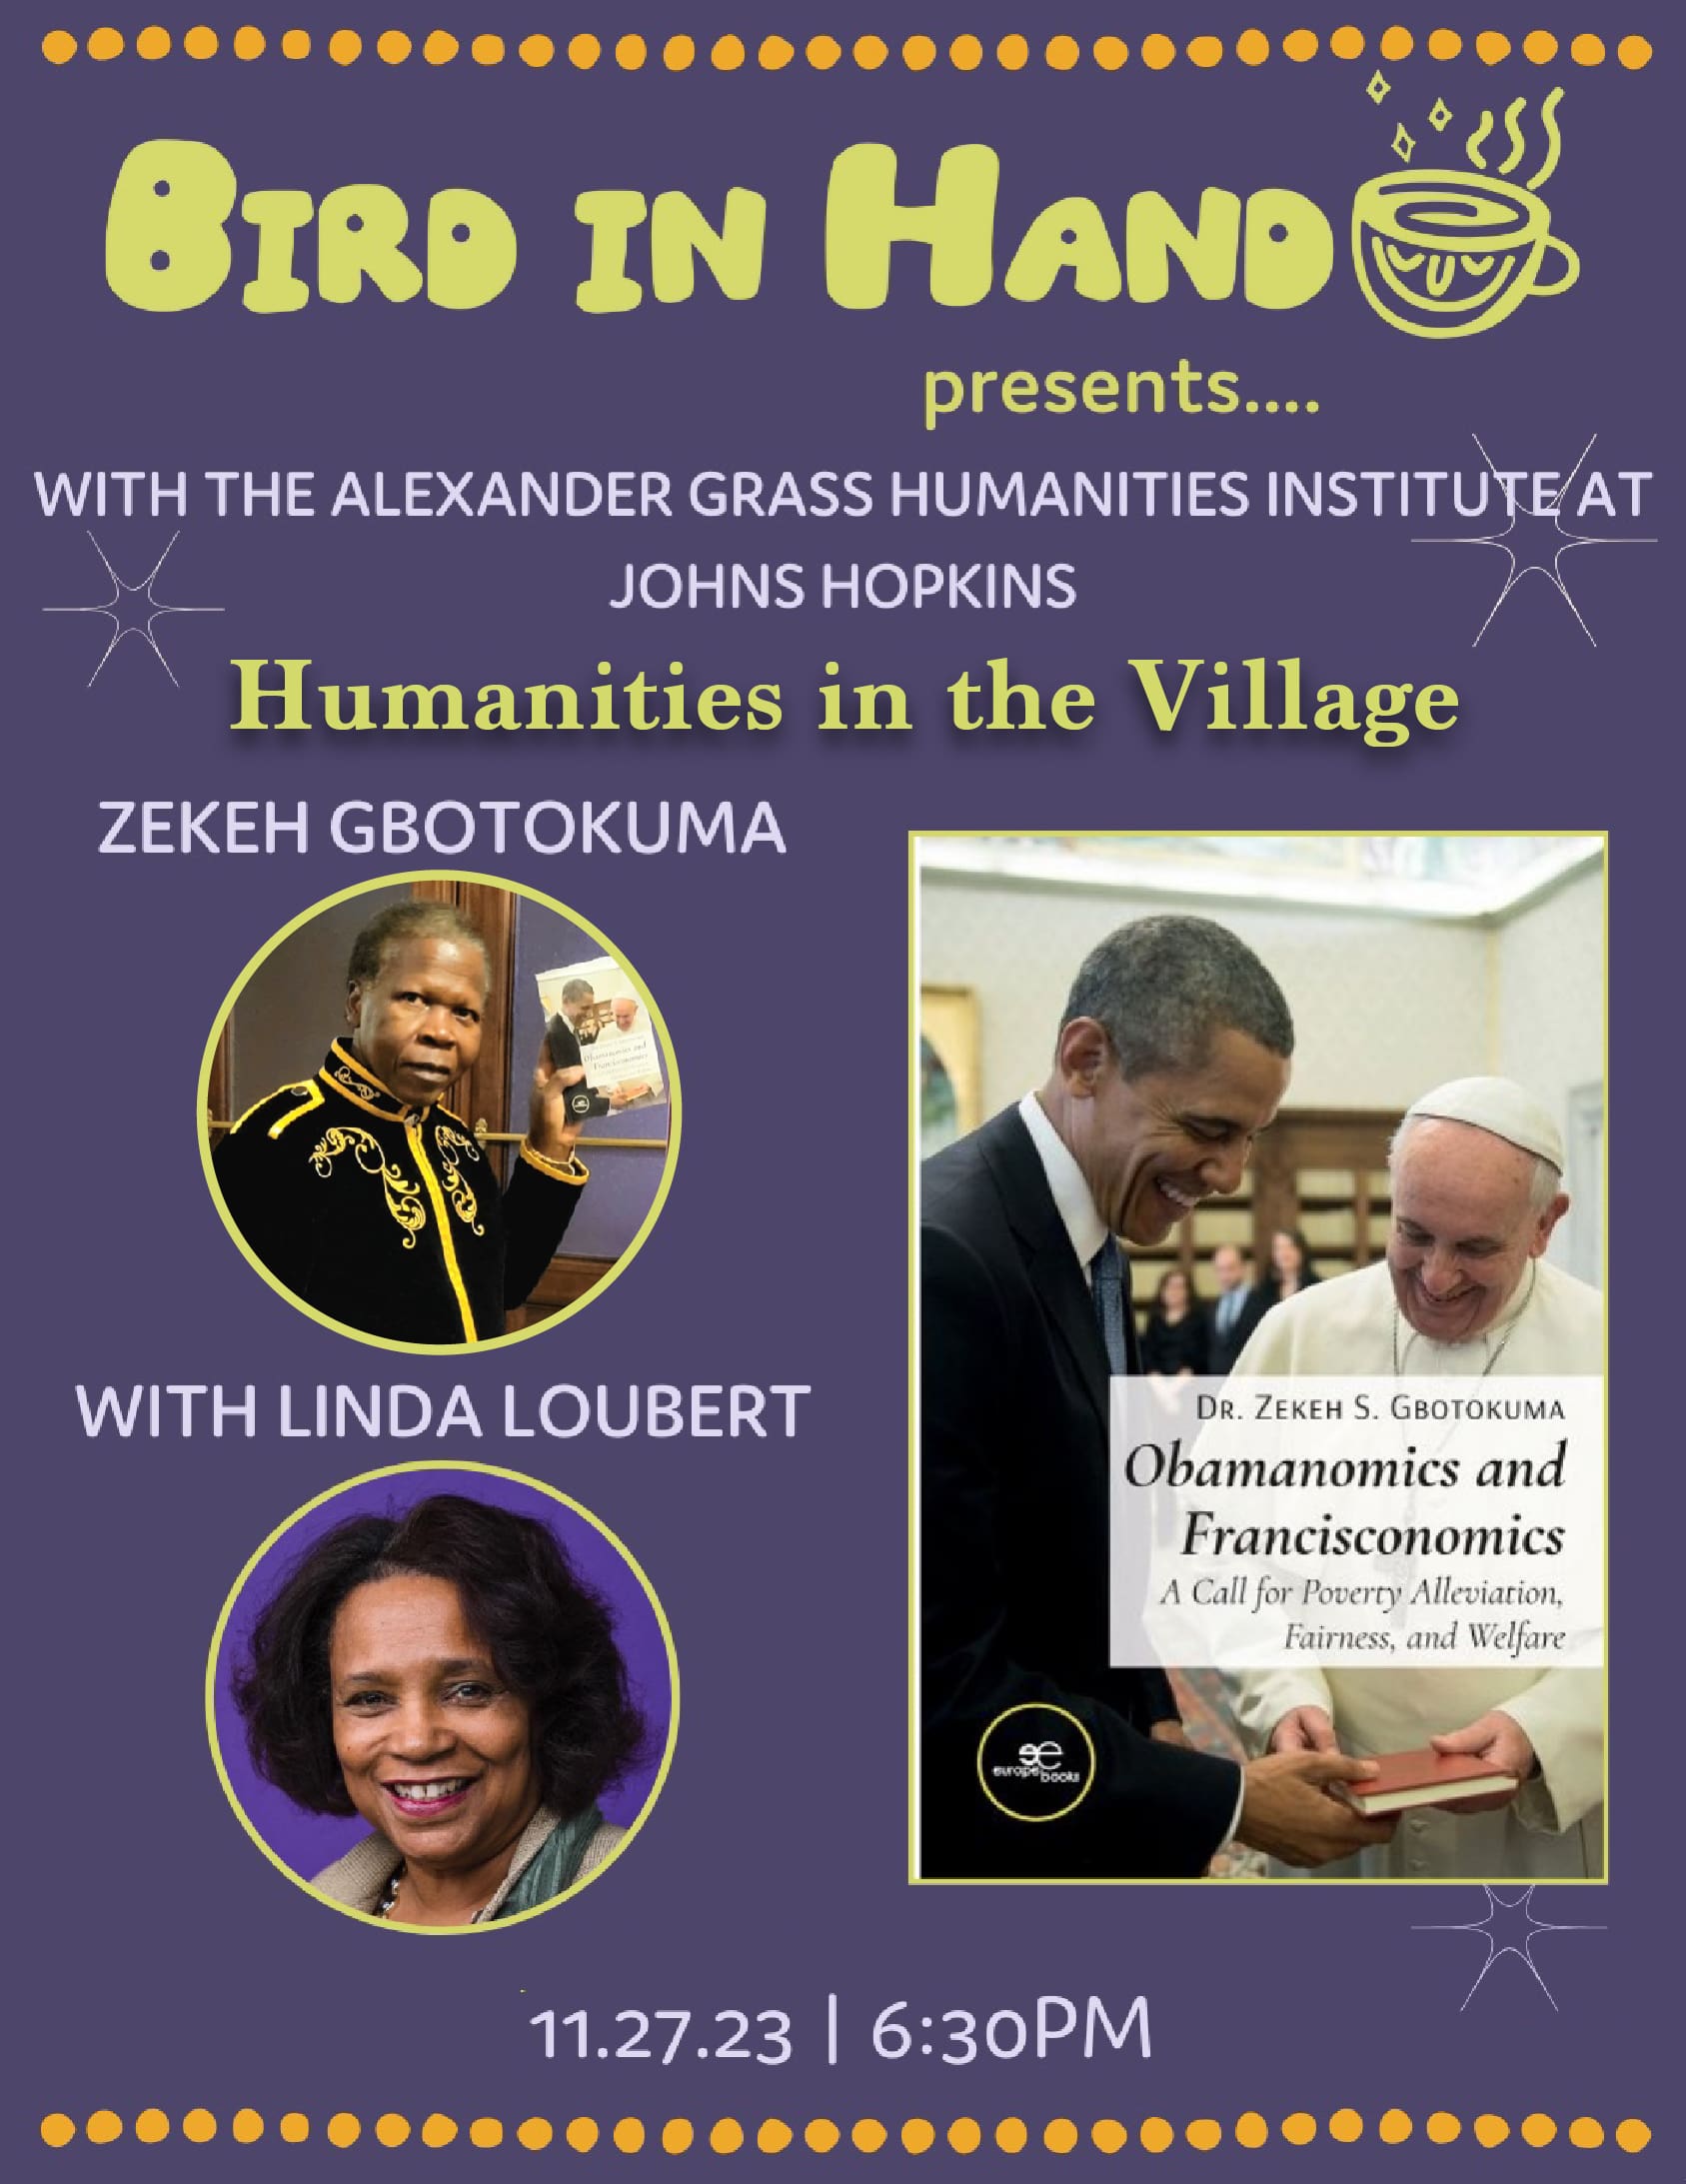 Flyer for Humanities in the Village at Bird in Hand on Nov. 27th with Zekeh Gbotokuma and Linda Loubert.